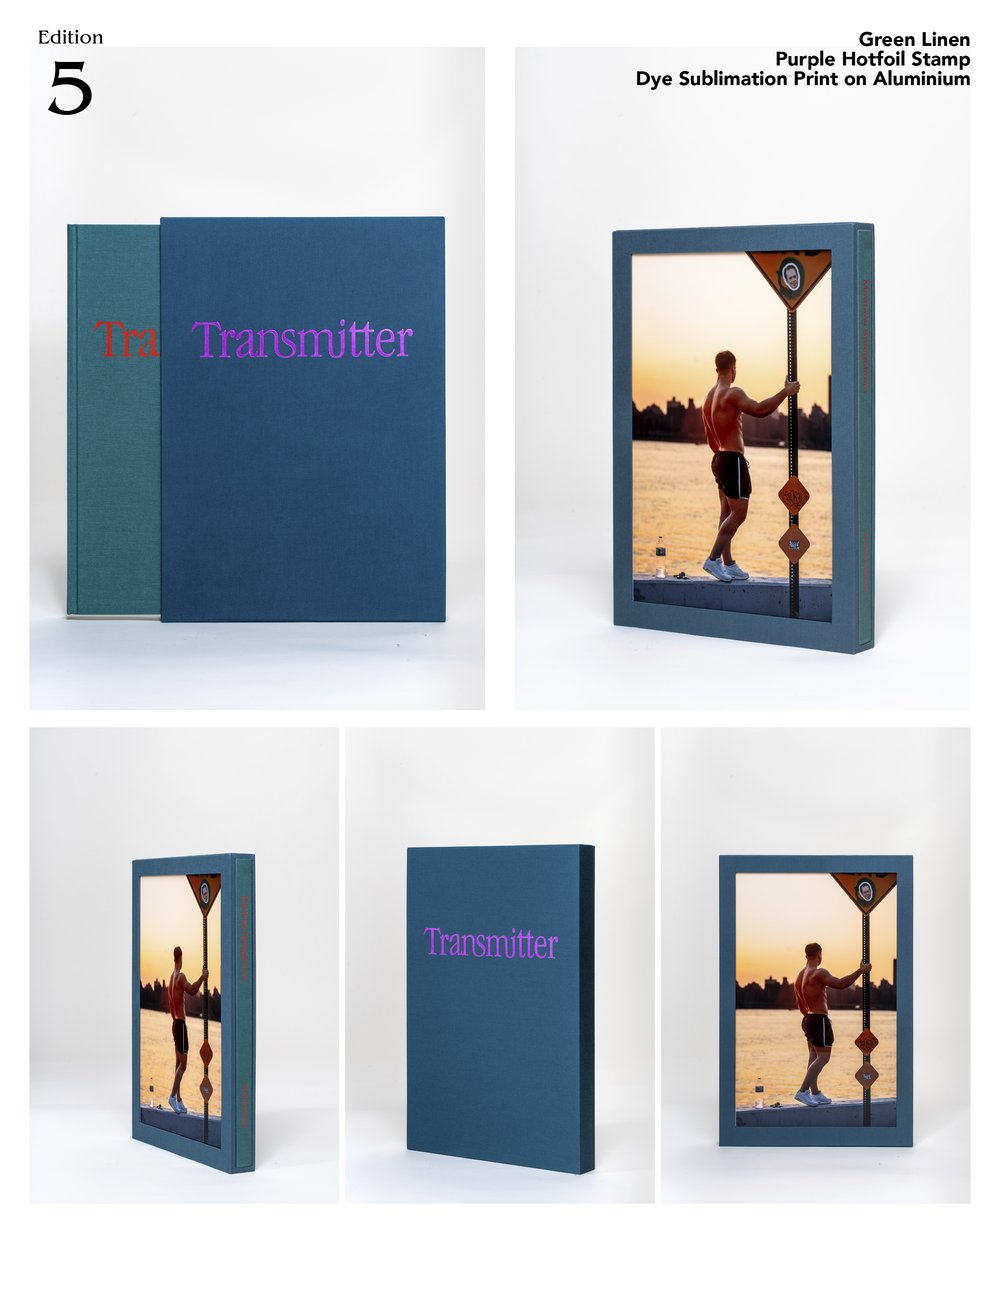 Transmitter Special Editions 4, 5, 6 - Multiple colors